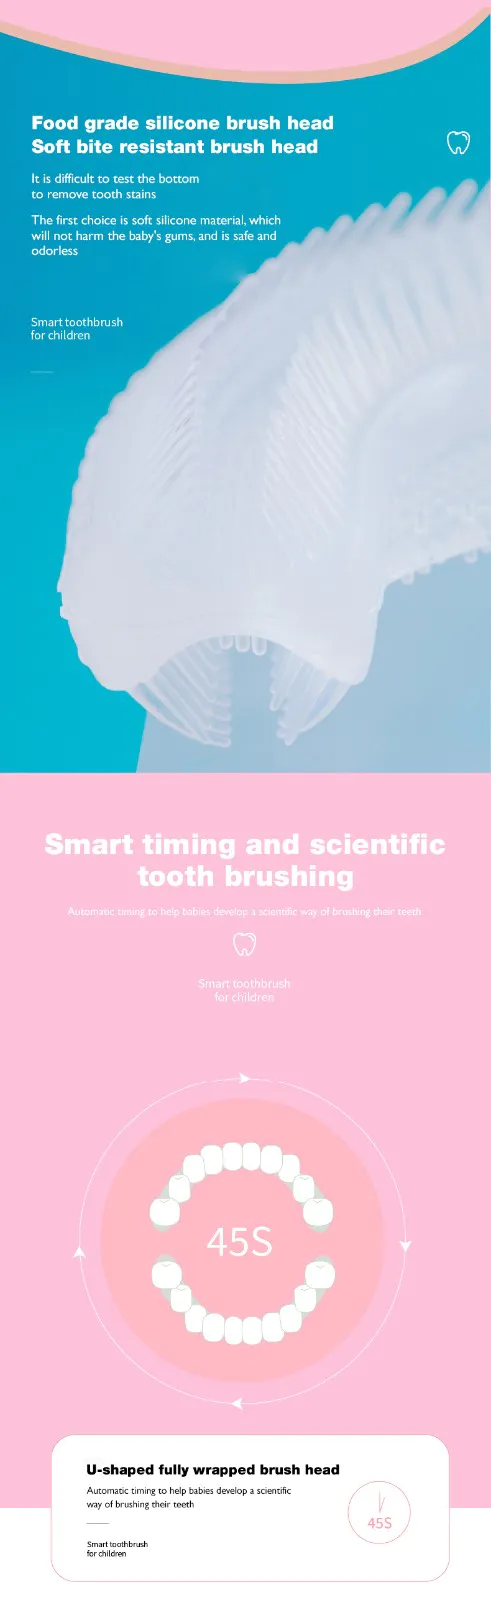 GlorySmile travel electric toothbrush for business for whitening teeth